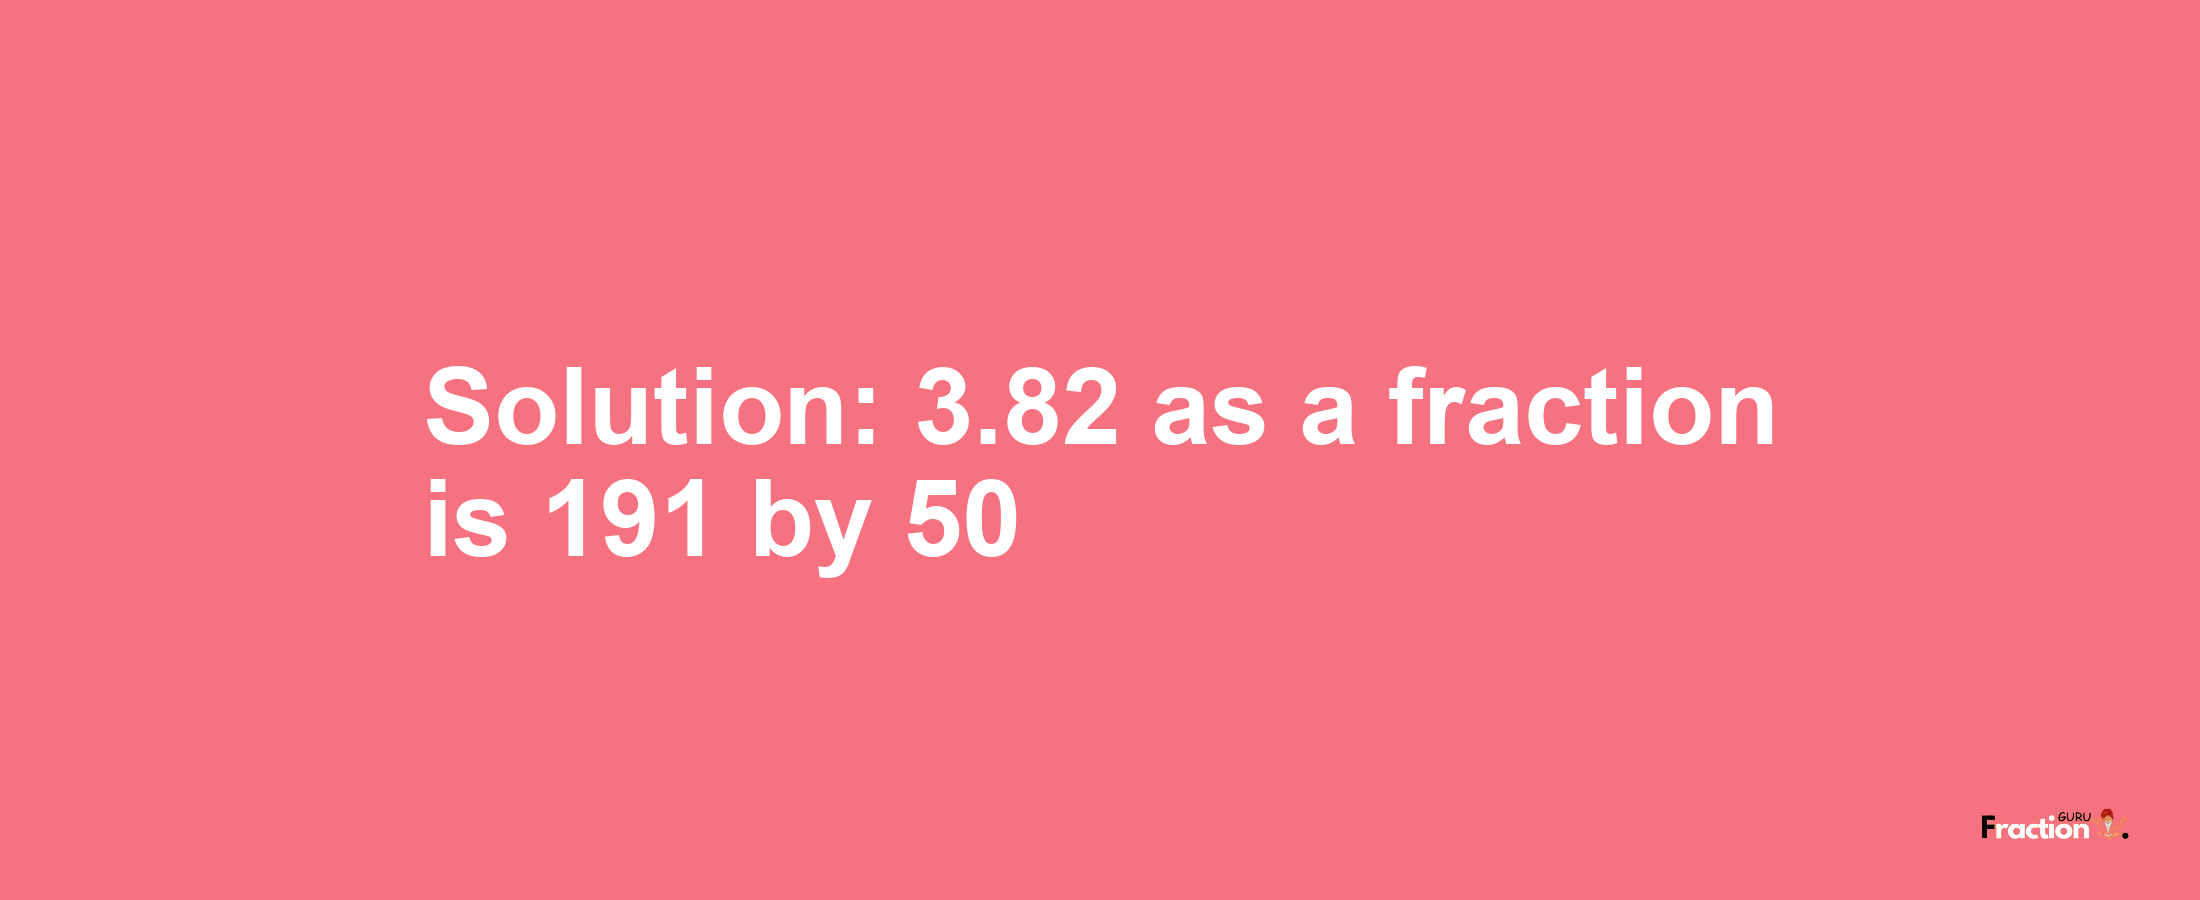 Solution:3.82 as a fraction is 191/50